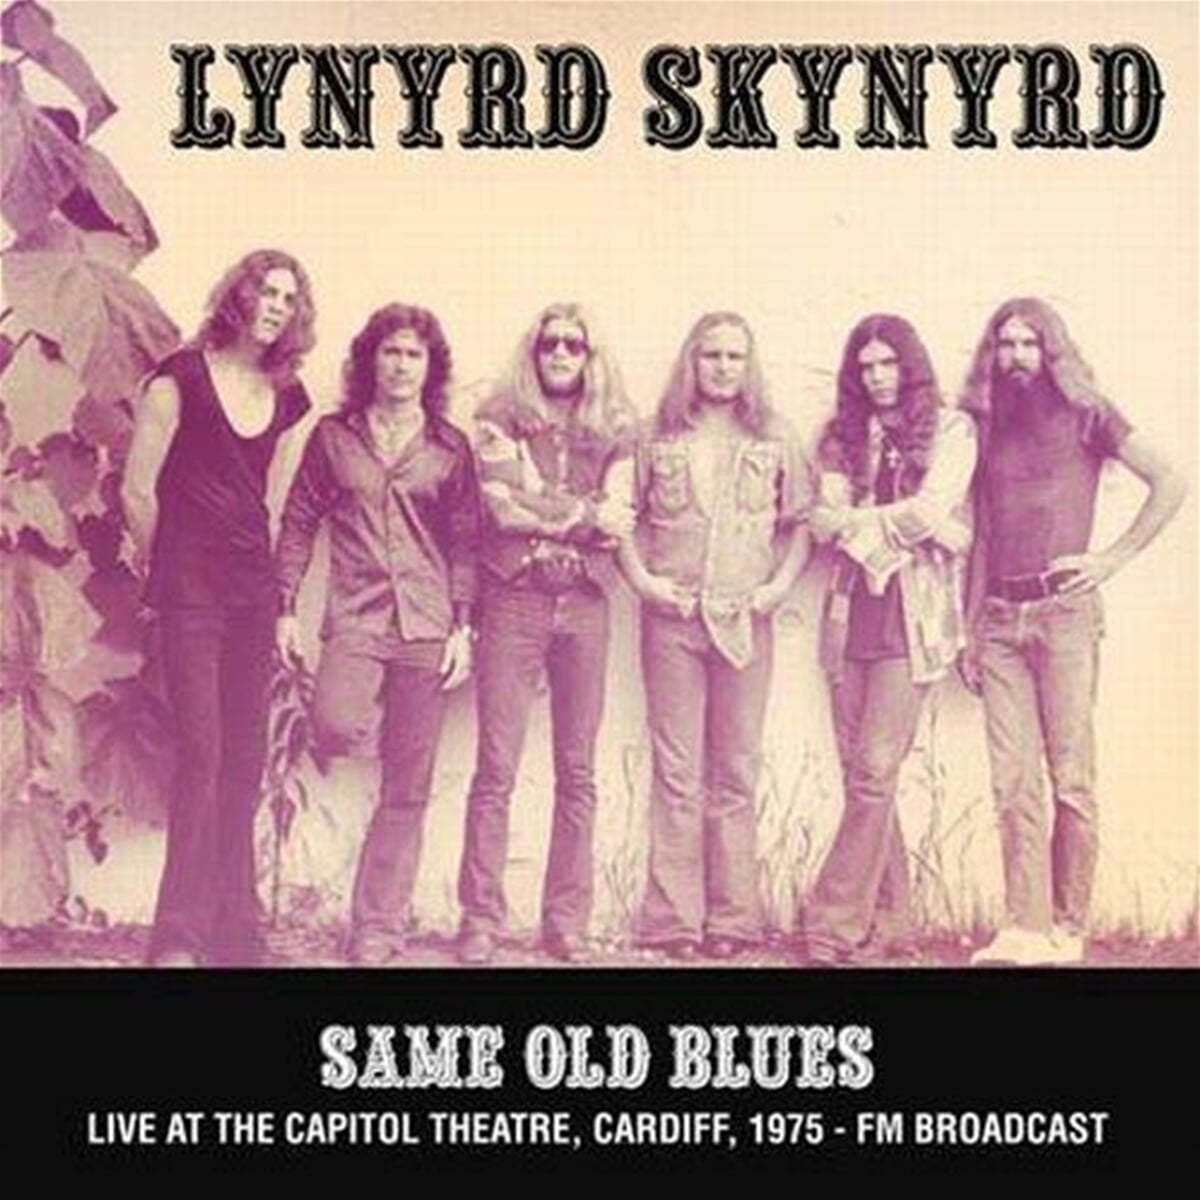 Lynyrd Skynyrd (레너드 스키너드) - Same Old Blues : Live At The Capitol Theatre, Cardiff, 1975 - FM Broadcast [LP] 